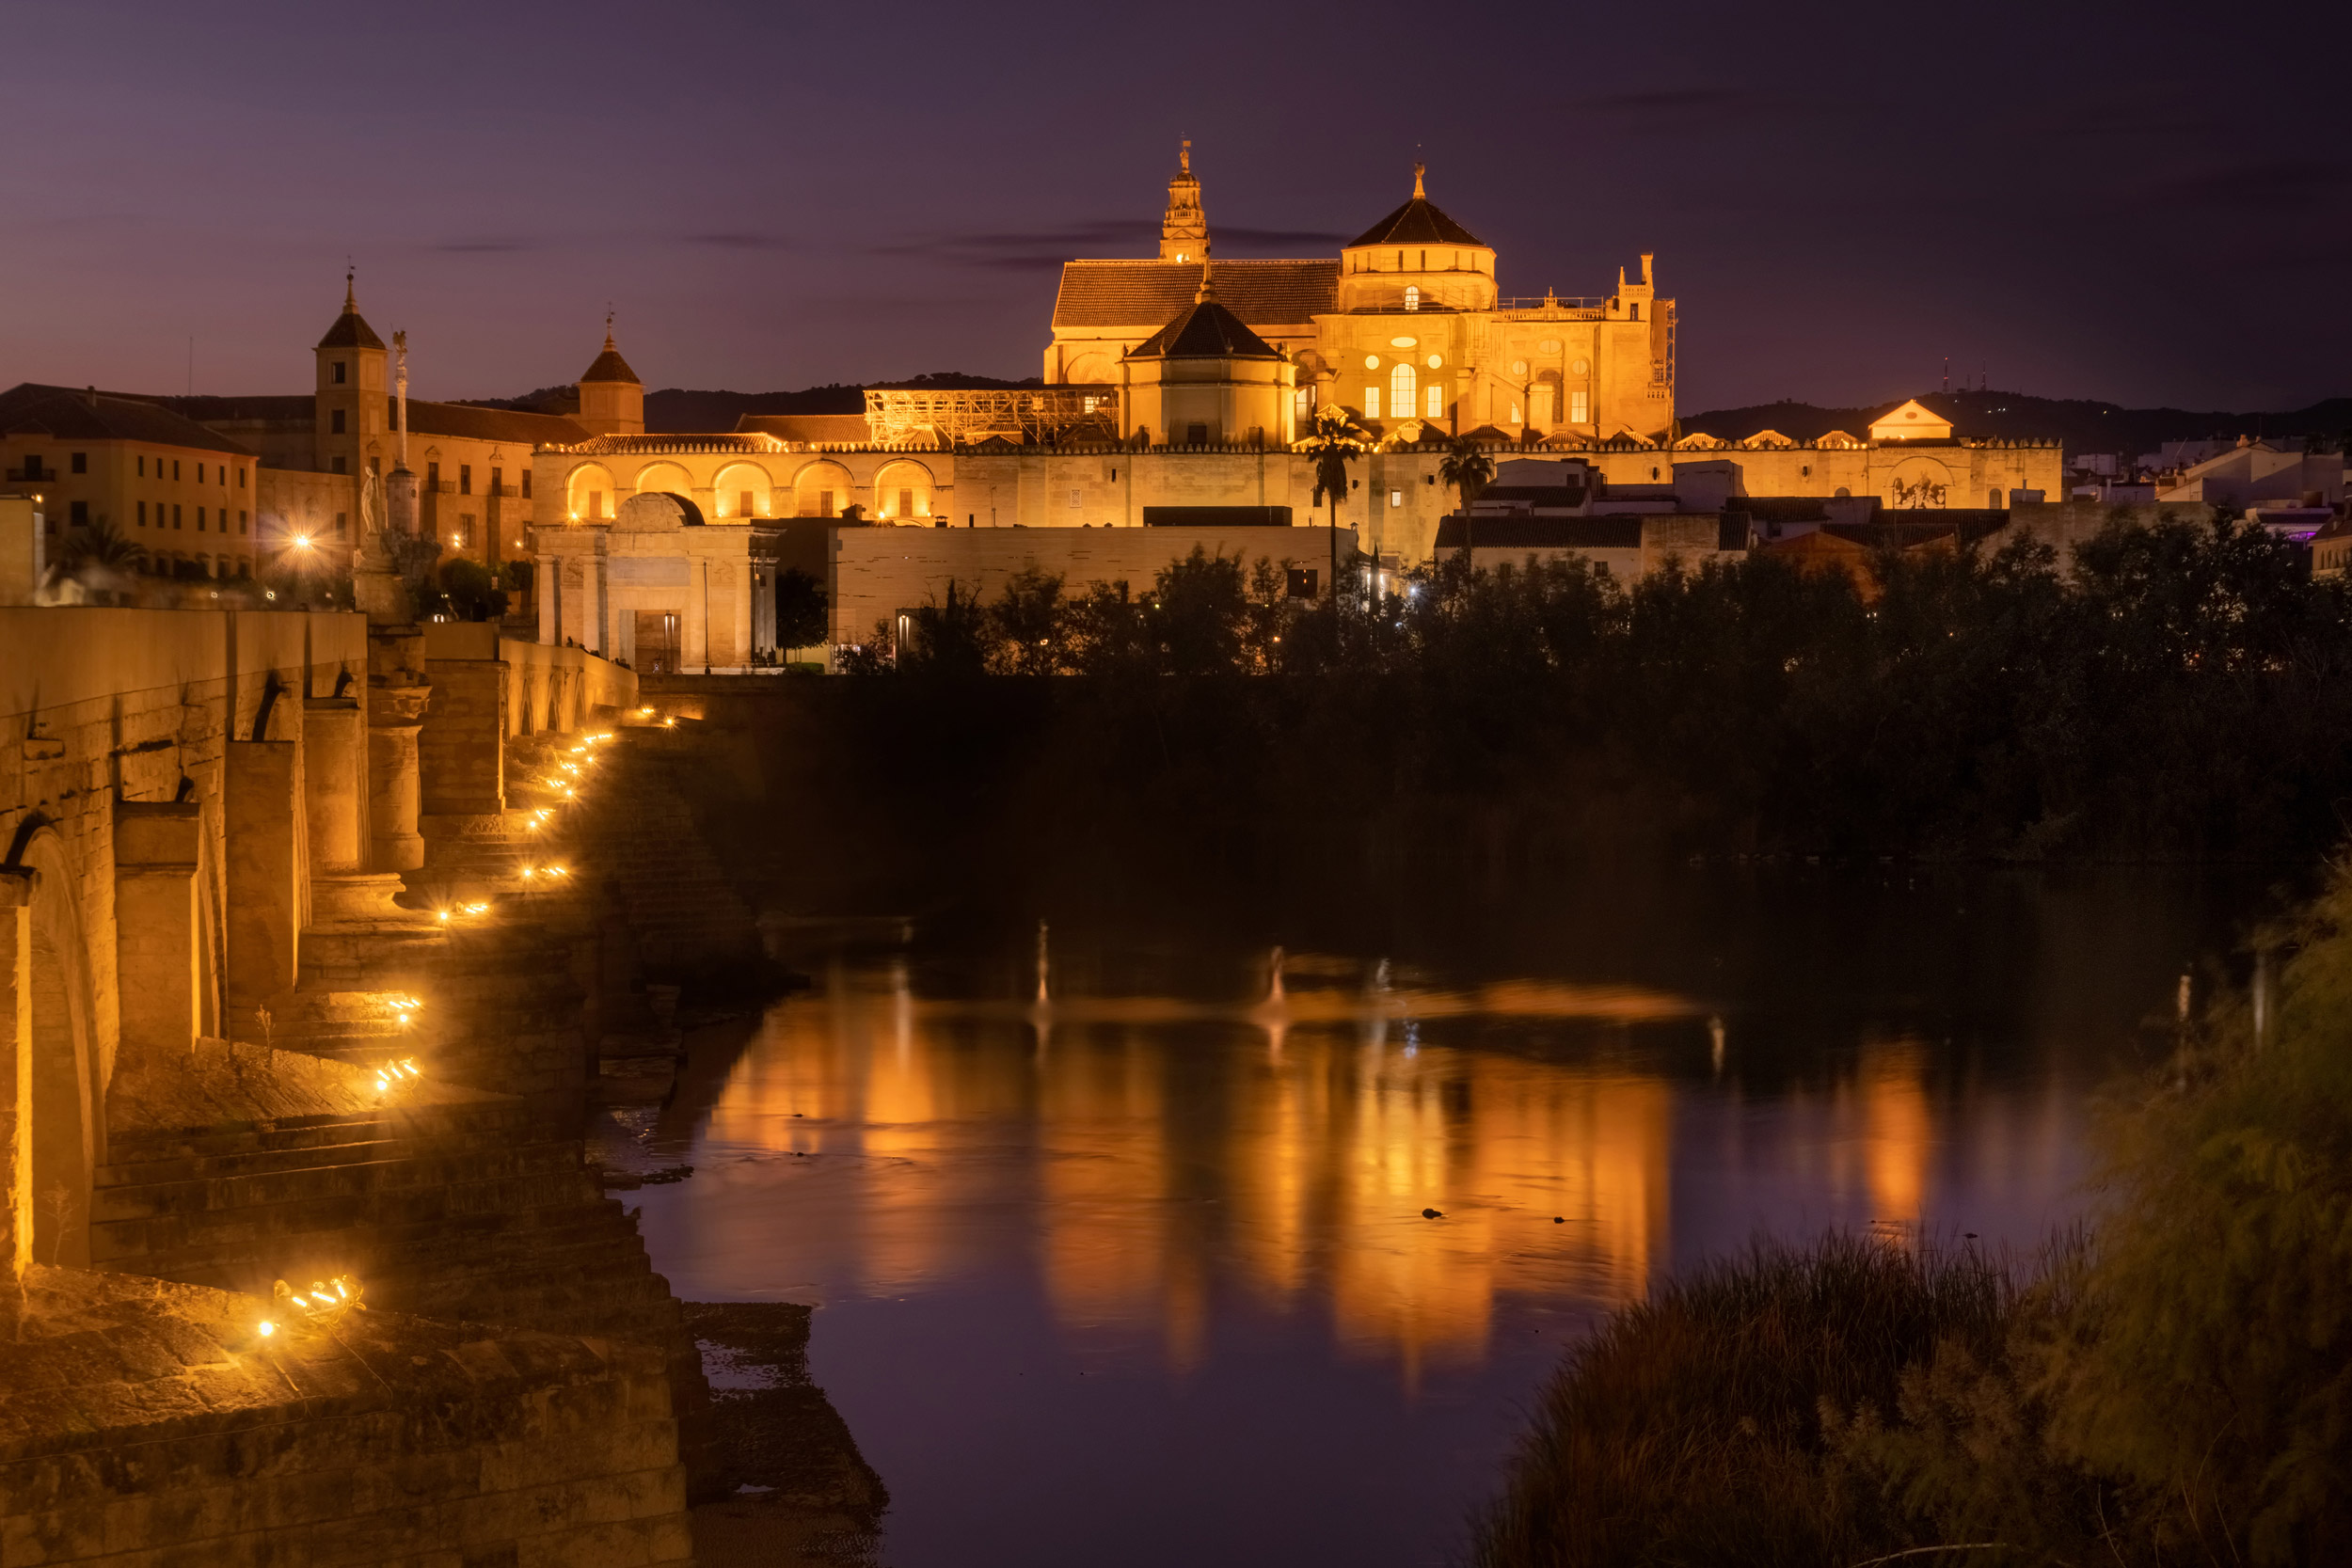 Roman Bridge and Guadalquivir river after the sunset, Great Mosq